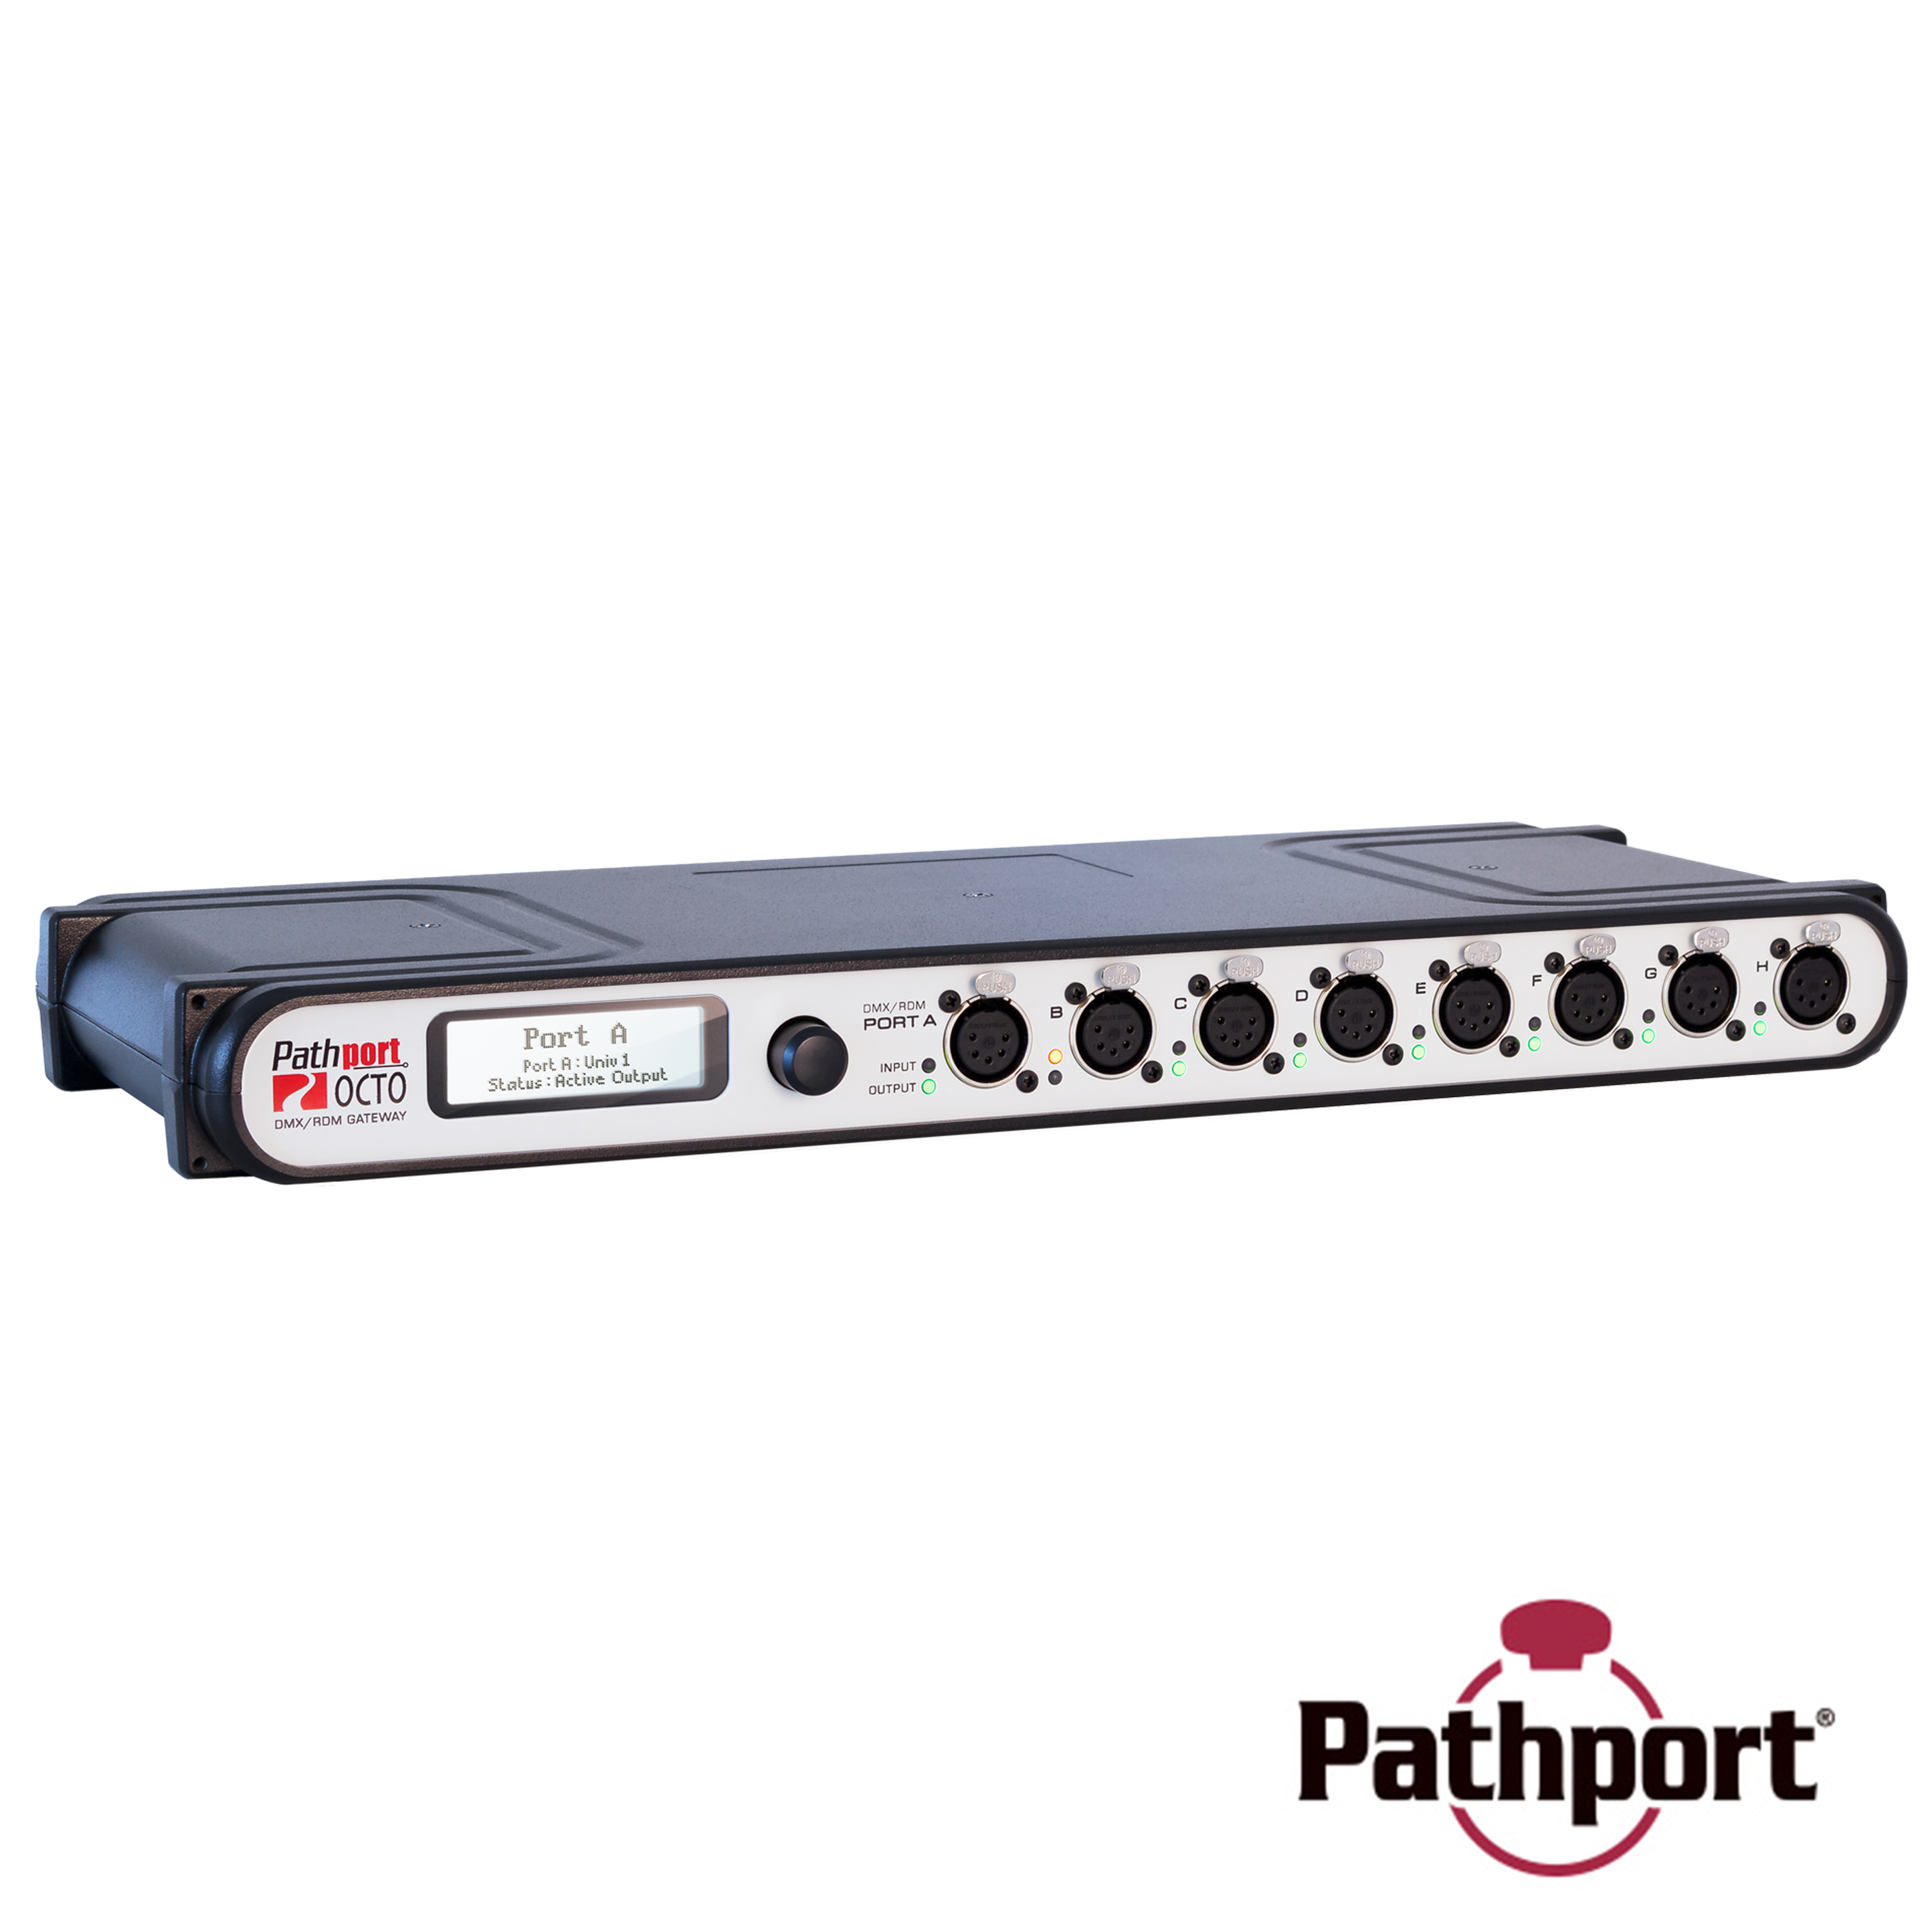 Pathport Octo with SixEye Technology